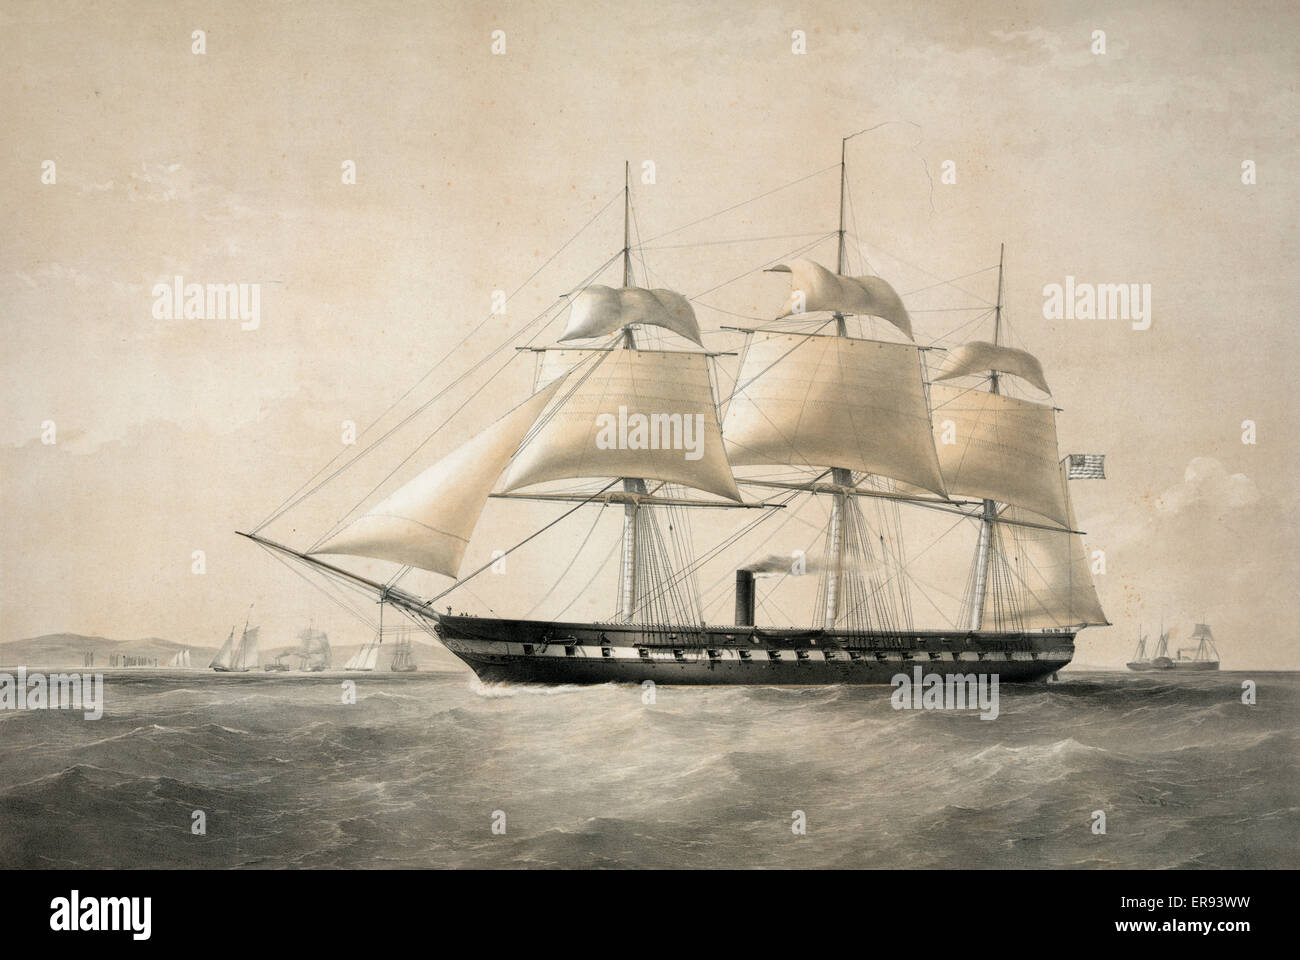 United States Auxiliary Screw steam frigate Merrimac 60 guns. Off the entrance to New York harbour. Print showing a broadside view of the port side of the steam frigate U.S.S. Merrimack undersail near the entrance to New York harbor. Includes measurements Stock Photo